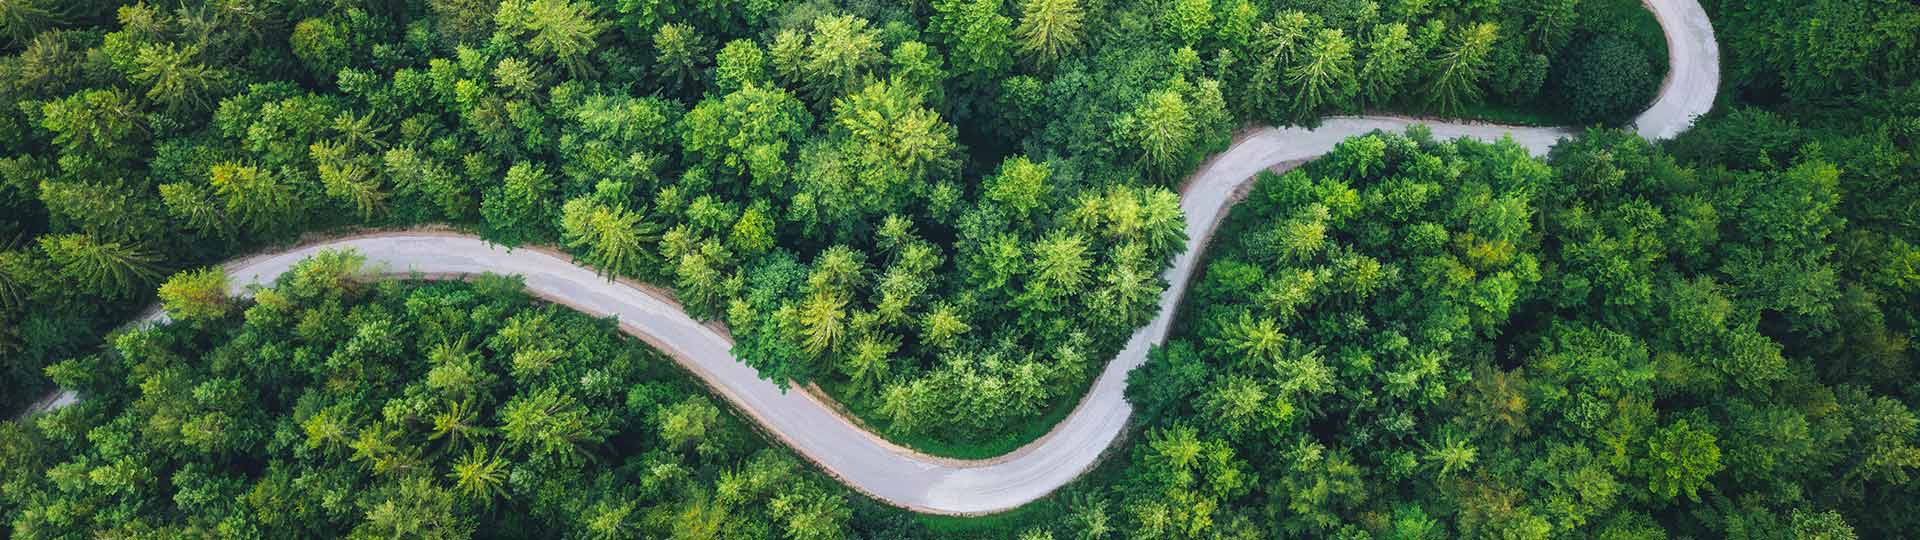 Idyllic winding road through the green pine forest